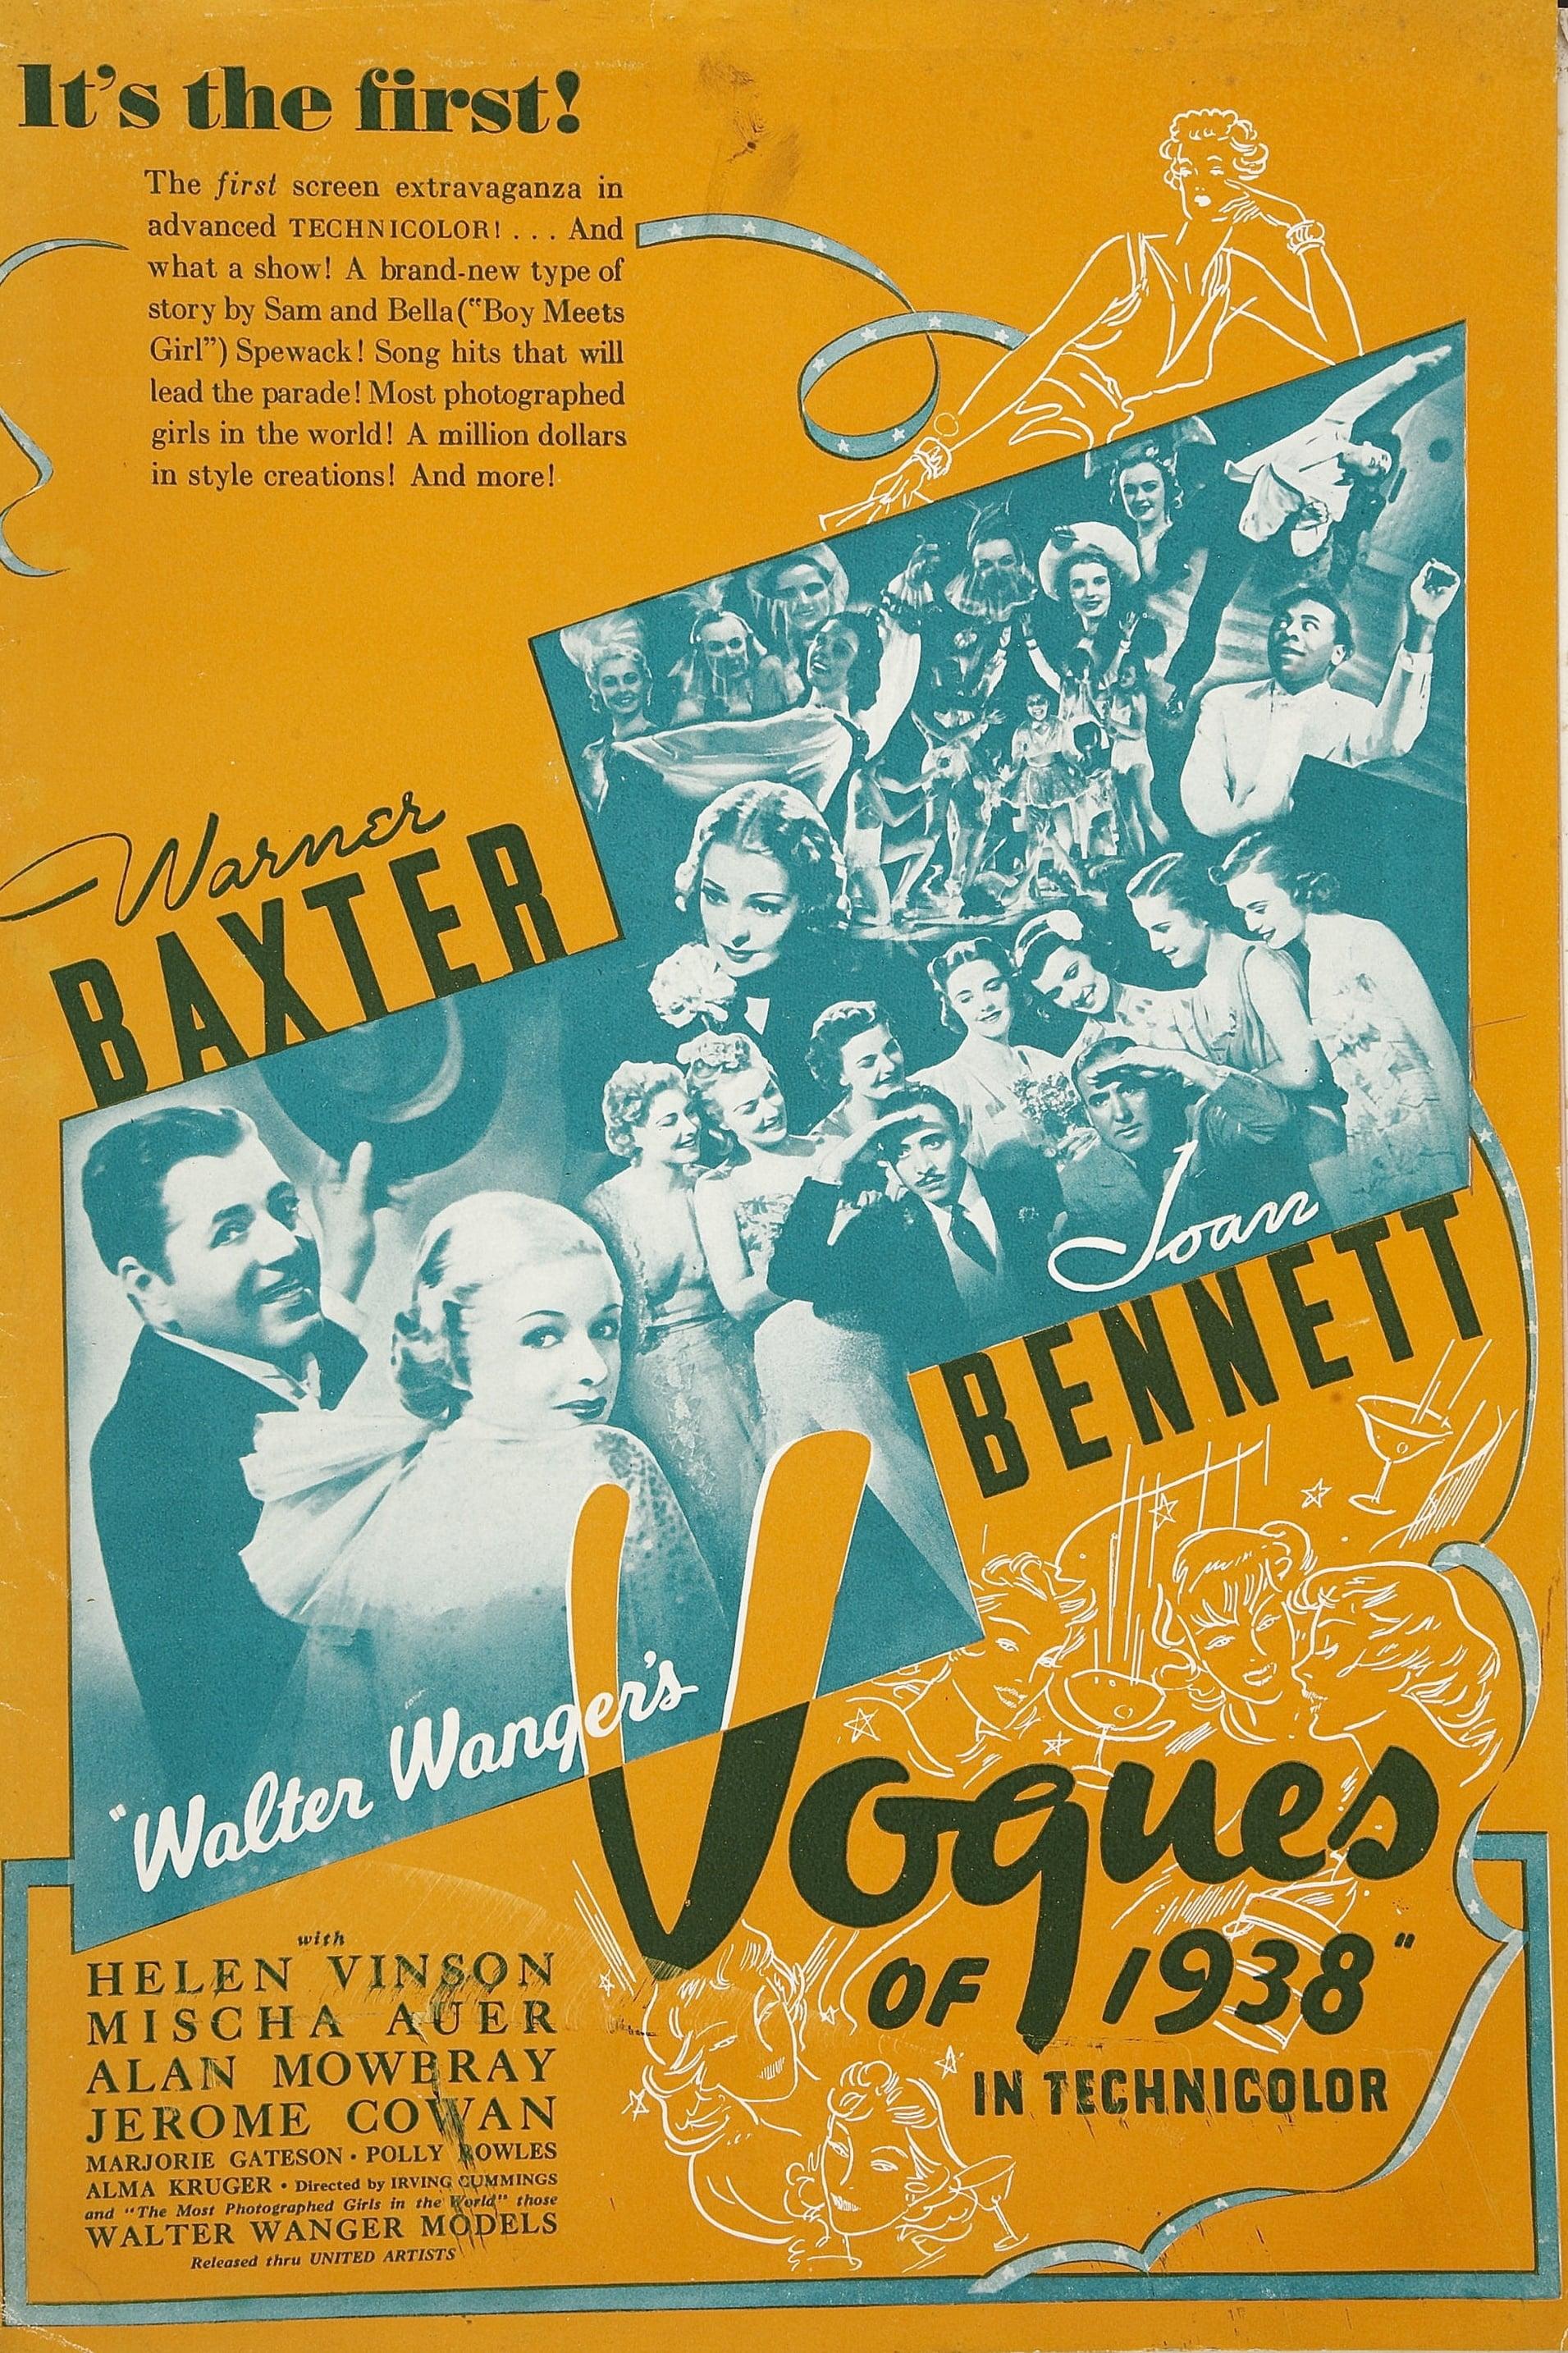 Vogues of 1938 poster